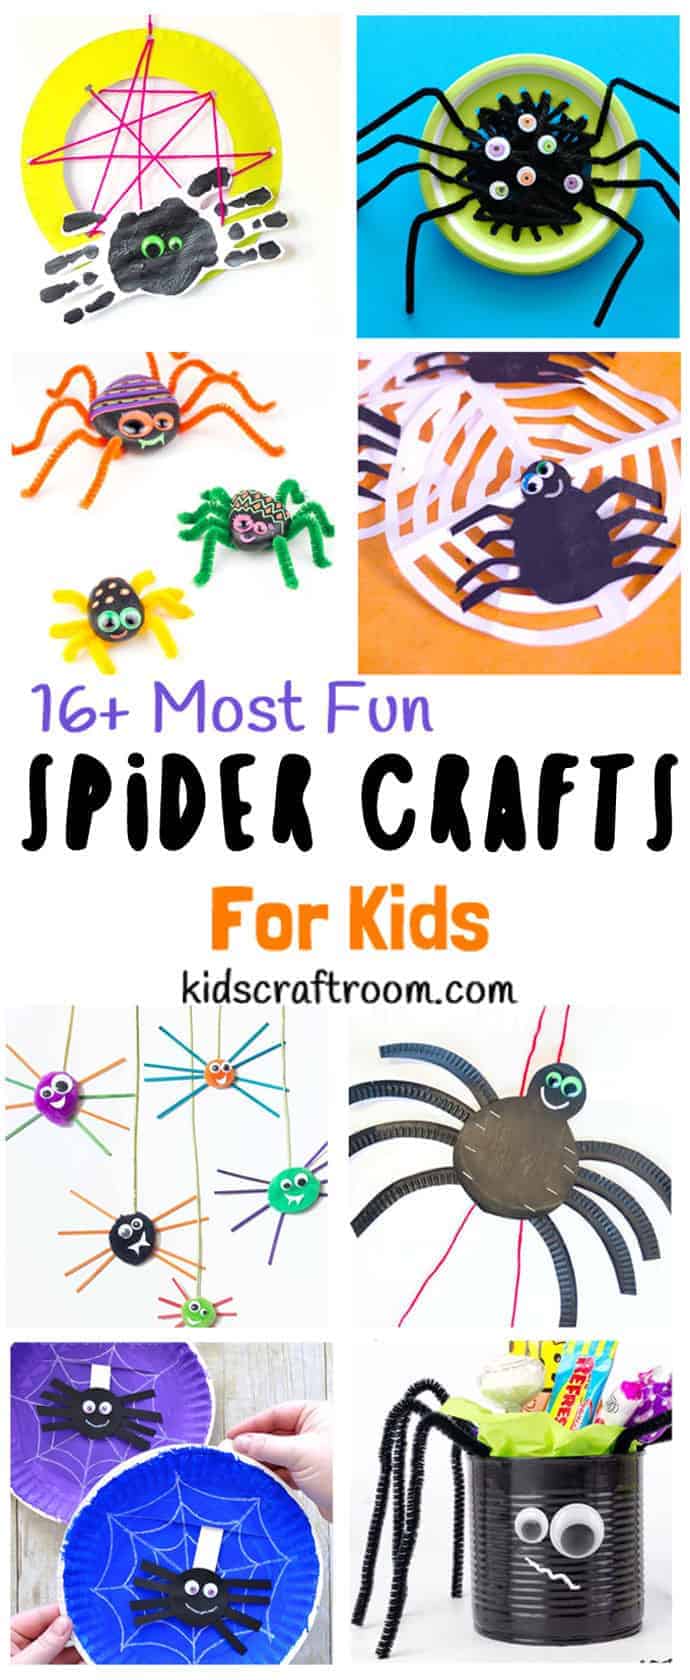 A fantastic collection of The Best Spider Crafts For Kids. Even if you're not normally a fan of real creepy crawlies these cute arachnids will have you smiling and wanting to make more! The cutest spider crafts for preschoolers on the web! Great as Halloween crafts. #spiders #spider #spidercrafts #spidercraftideas #spidercraftprojects #spideractivities #halloween #halloweencrafts #preschoolers #kidscrafts #kidscraft #craftsforkids #kidscraftroom